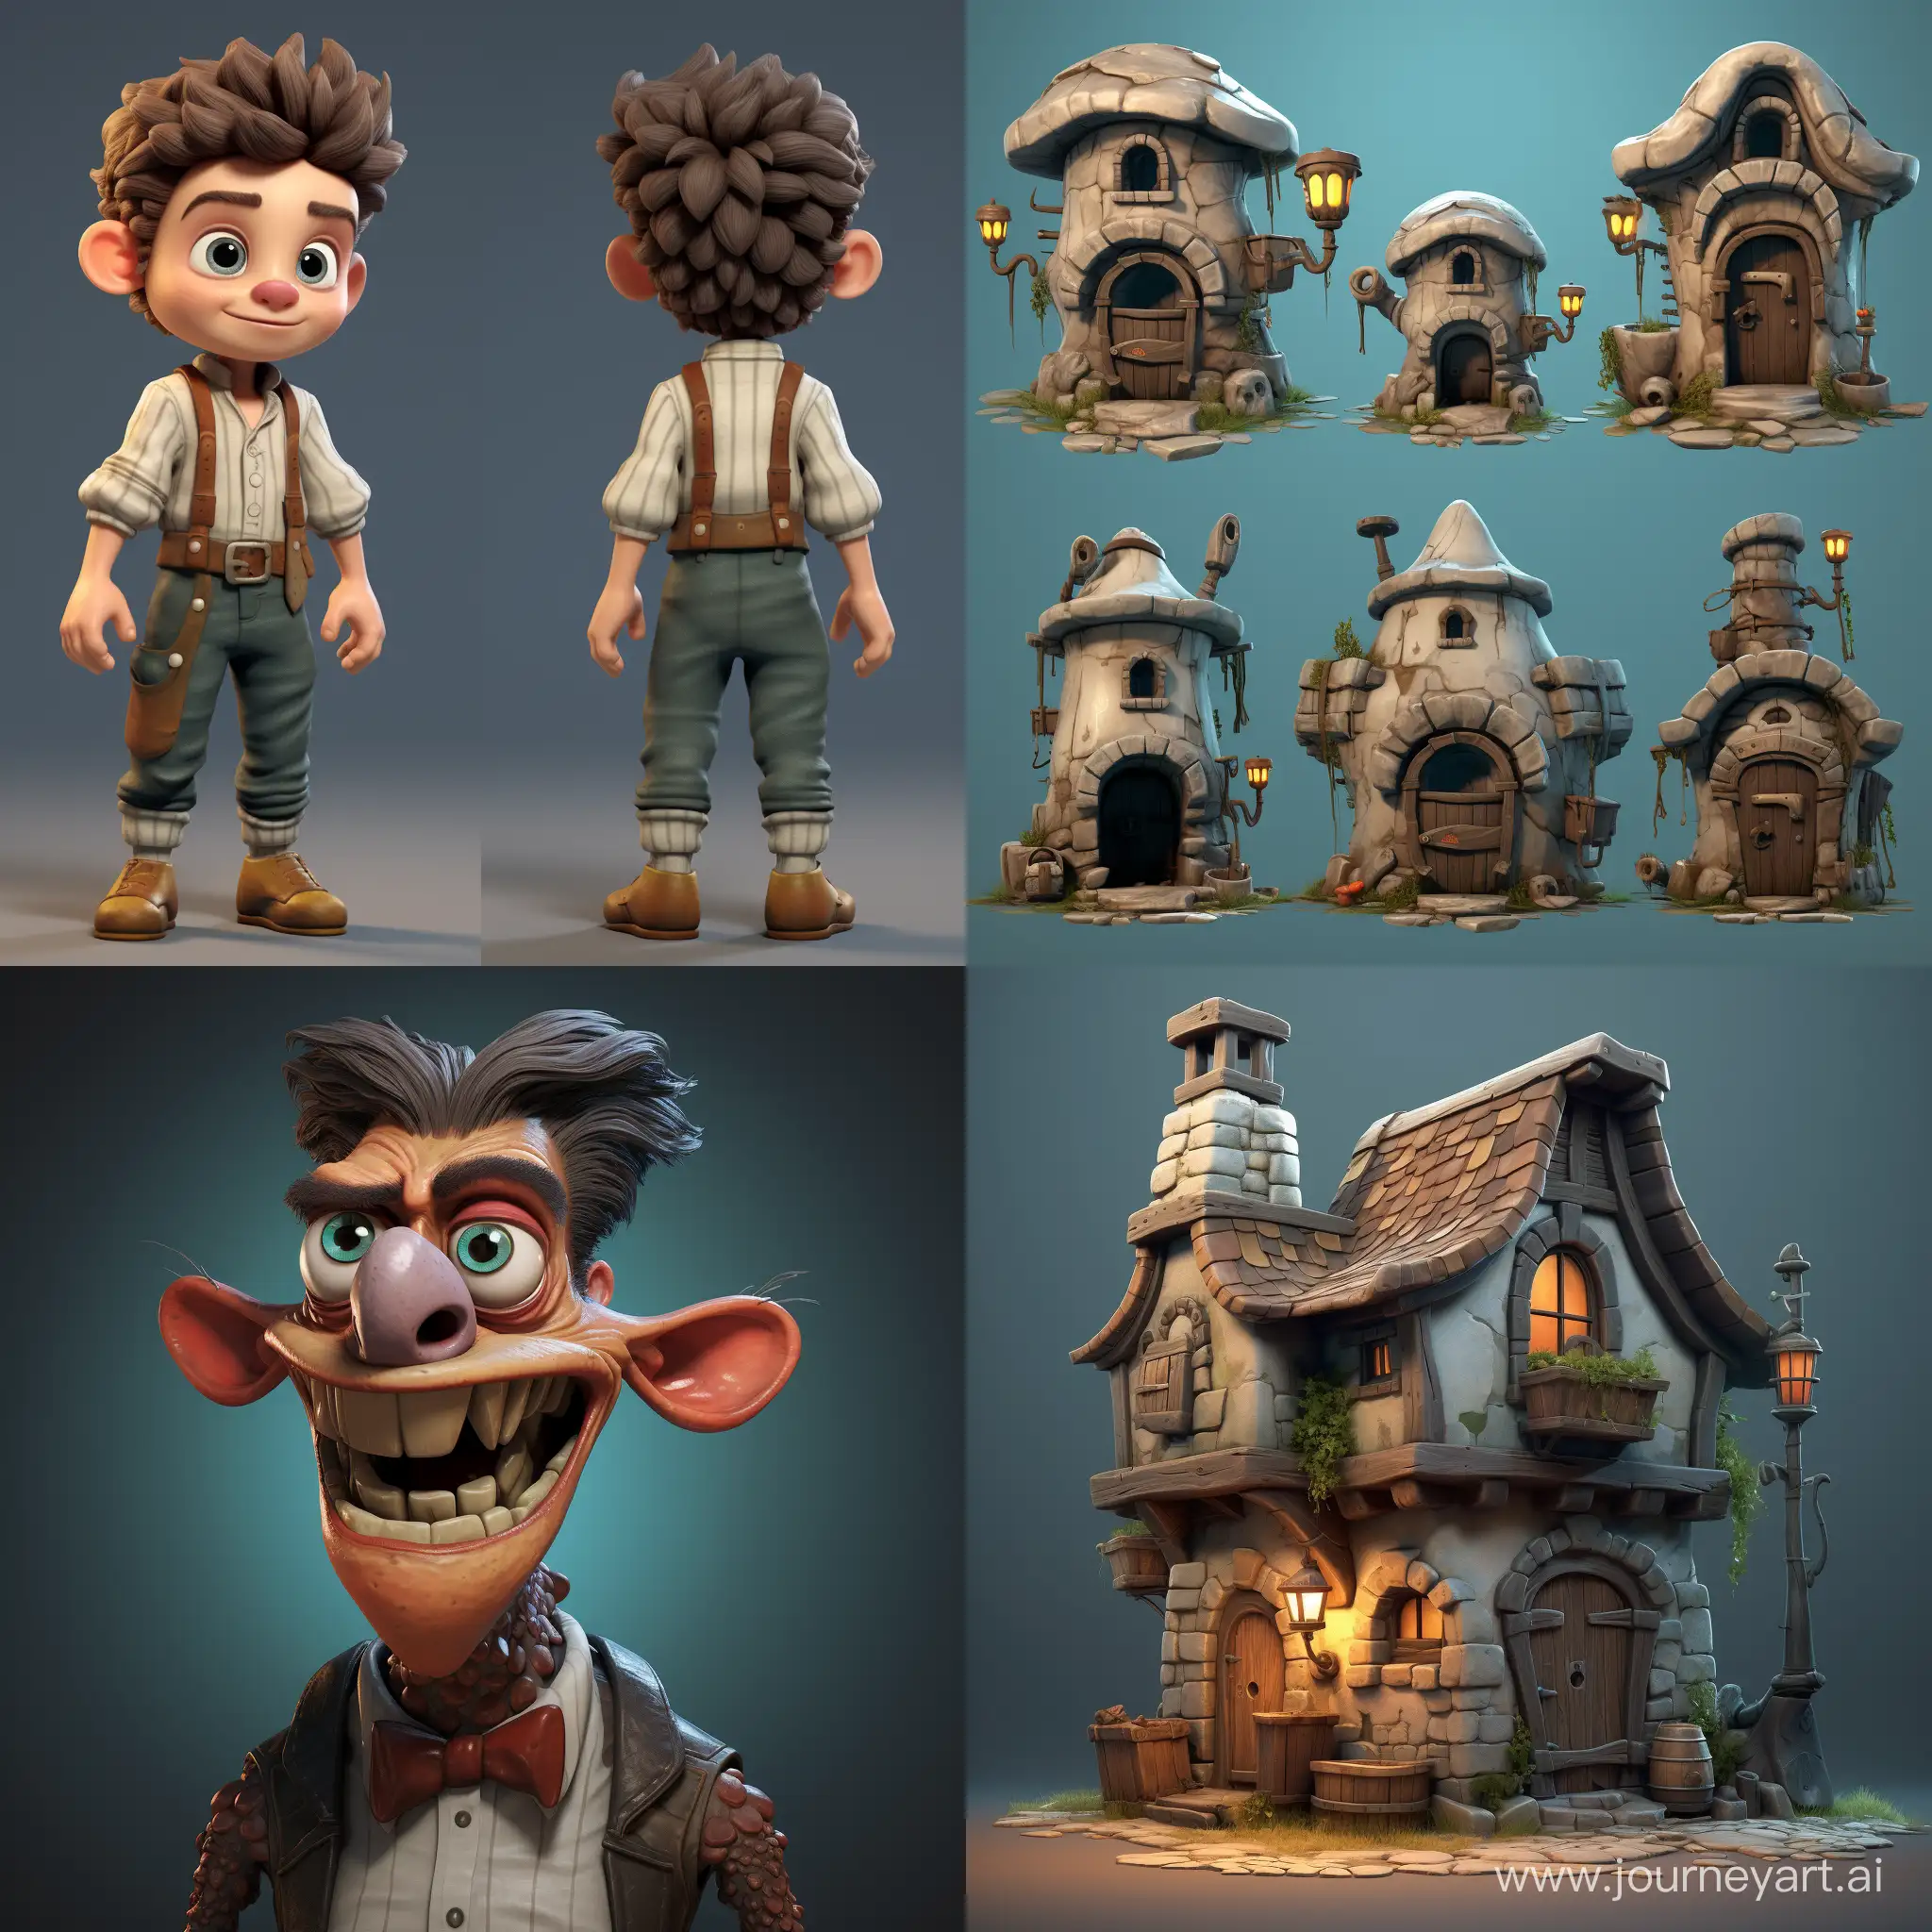 Playful-Cartoon-Characters-at-Wells-Whimsical-Game-Material-in-11-Aspect-Ratio